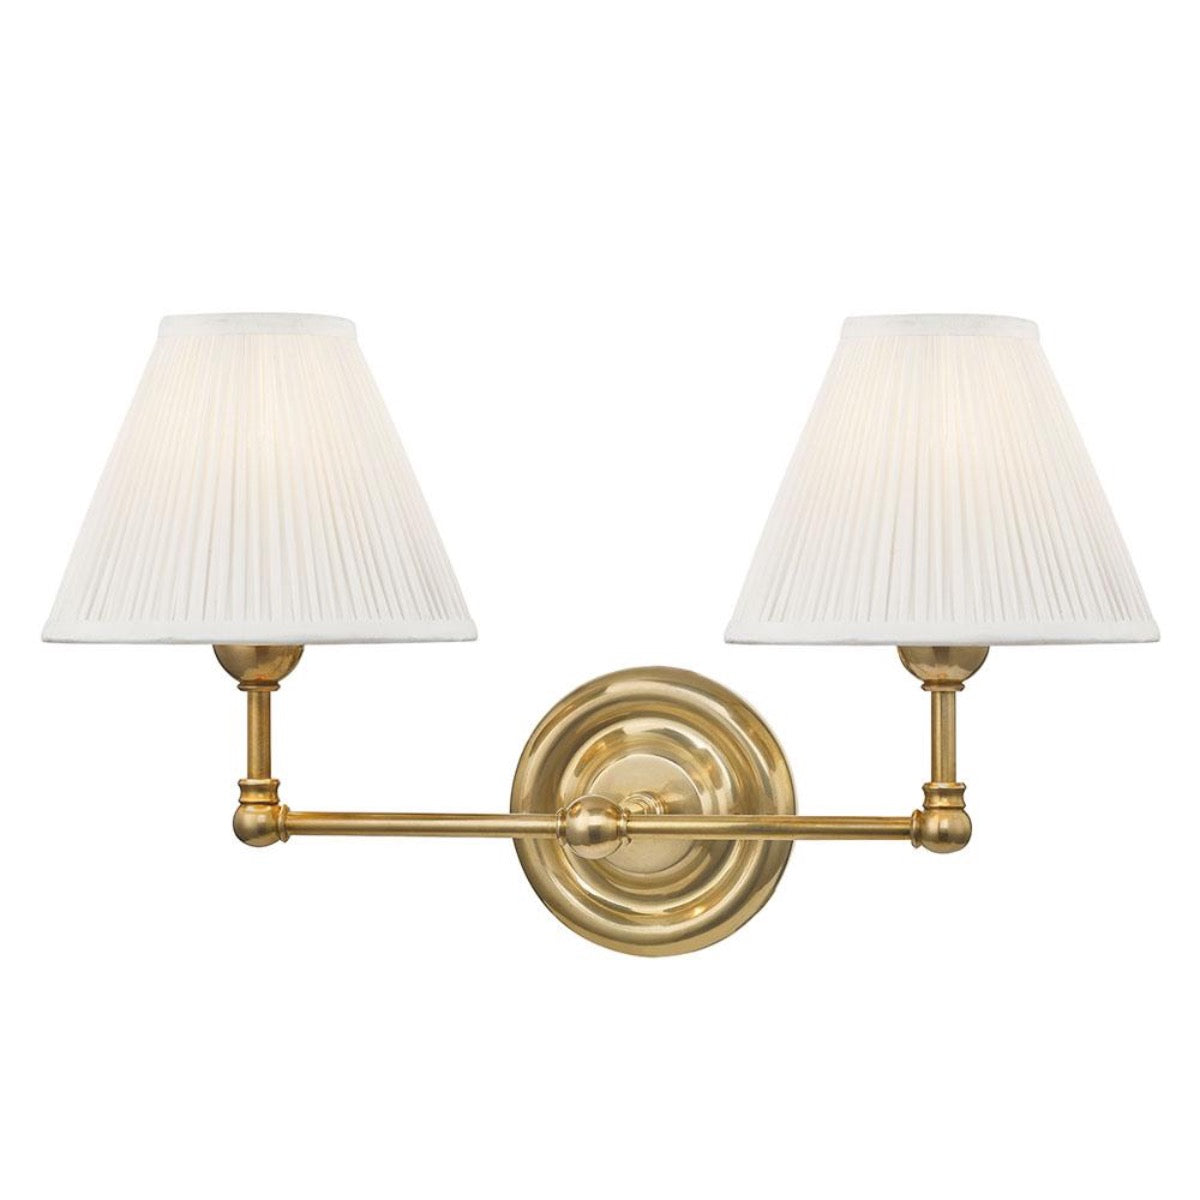 Classic Silk Double Sconce Aged Brass. Front view.